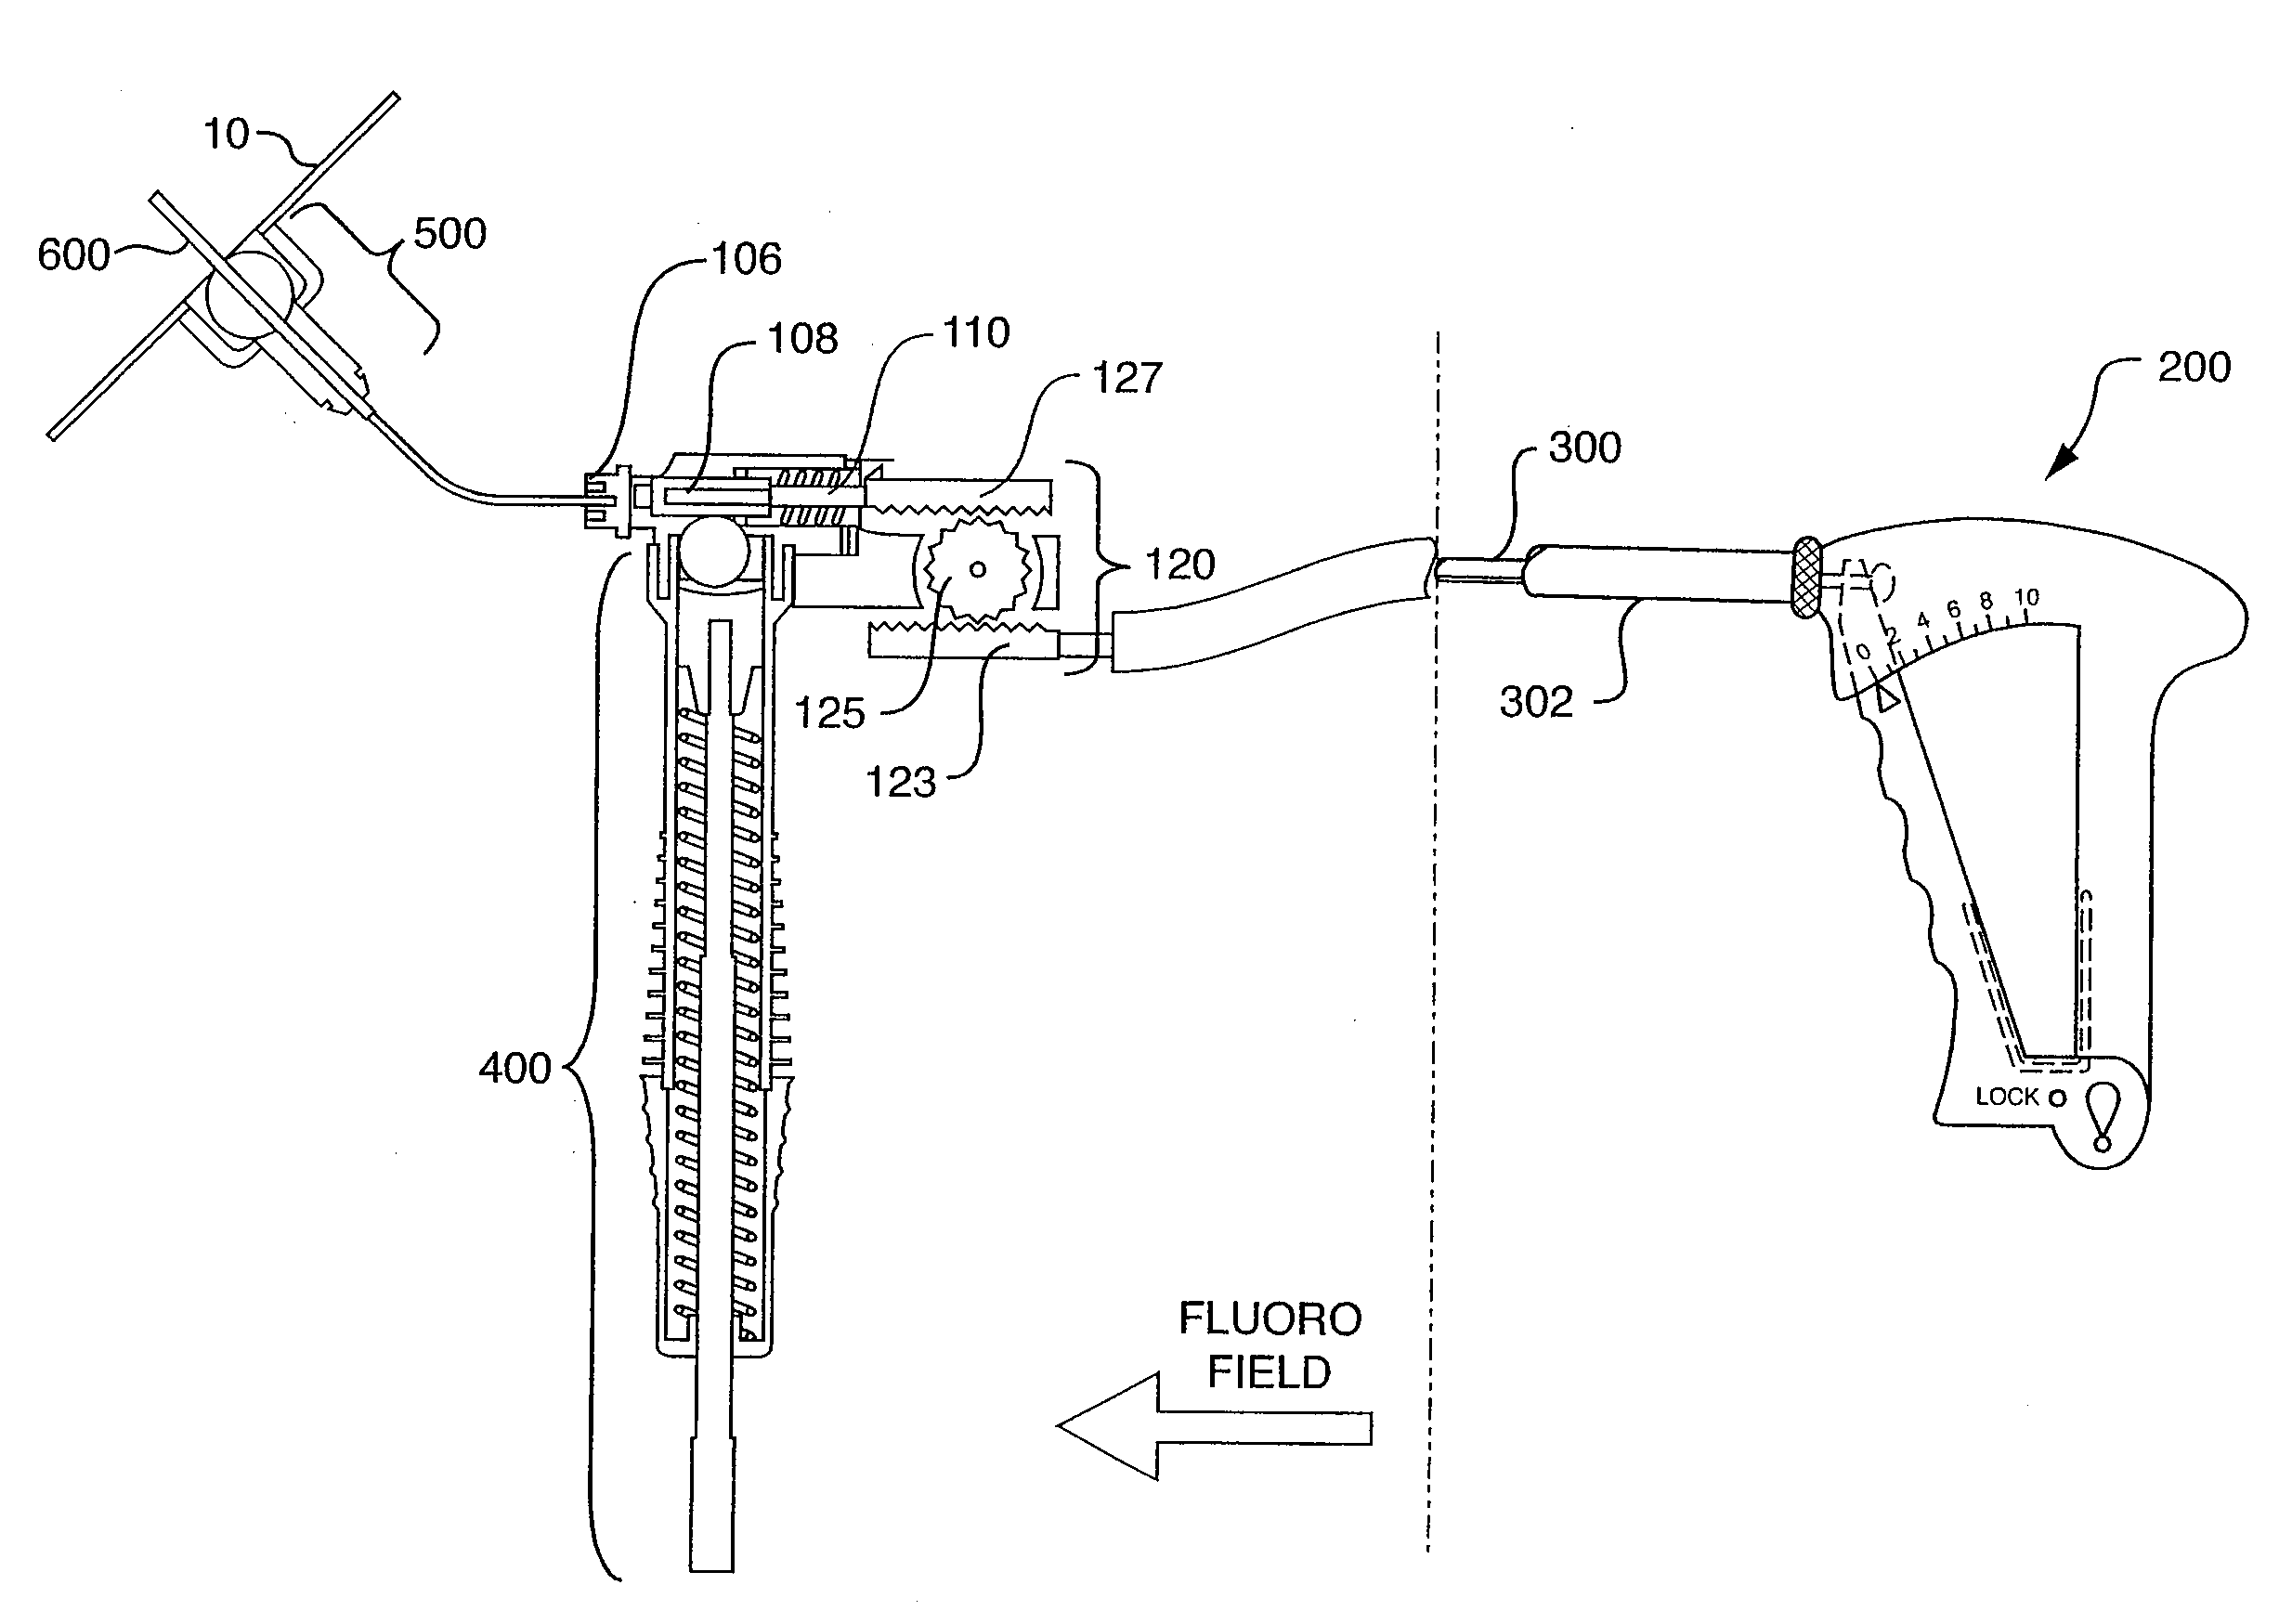 Remotely-activated vertebroplasty injection device